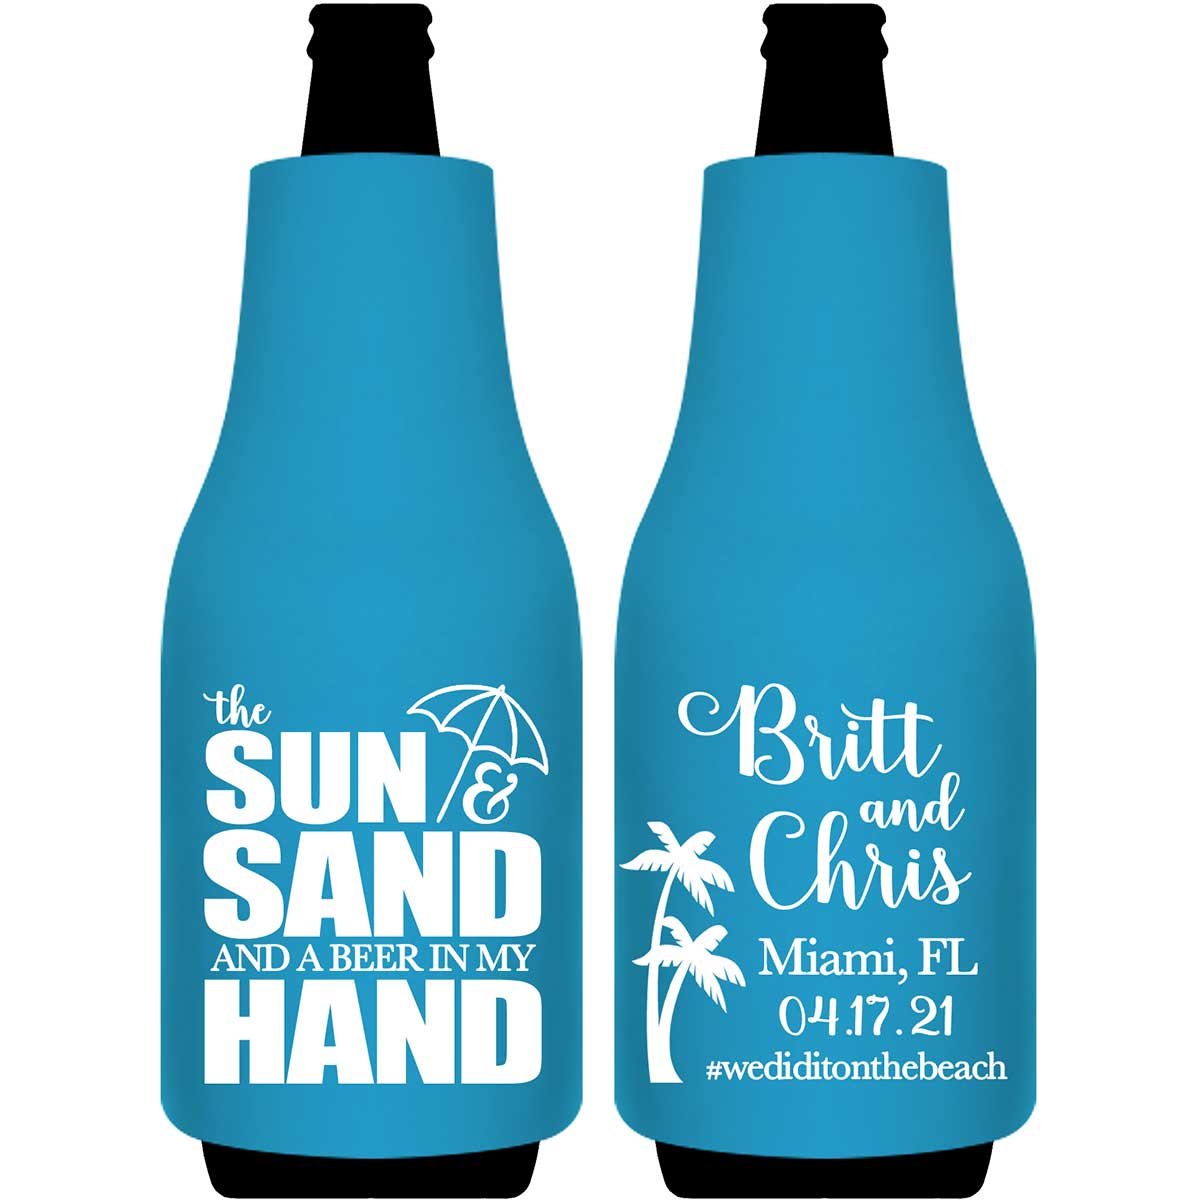 The Sun & The Sand Beer In My Hand 1A Foldable Bottle Sleeve Koozies Wedding Gifts for Guests